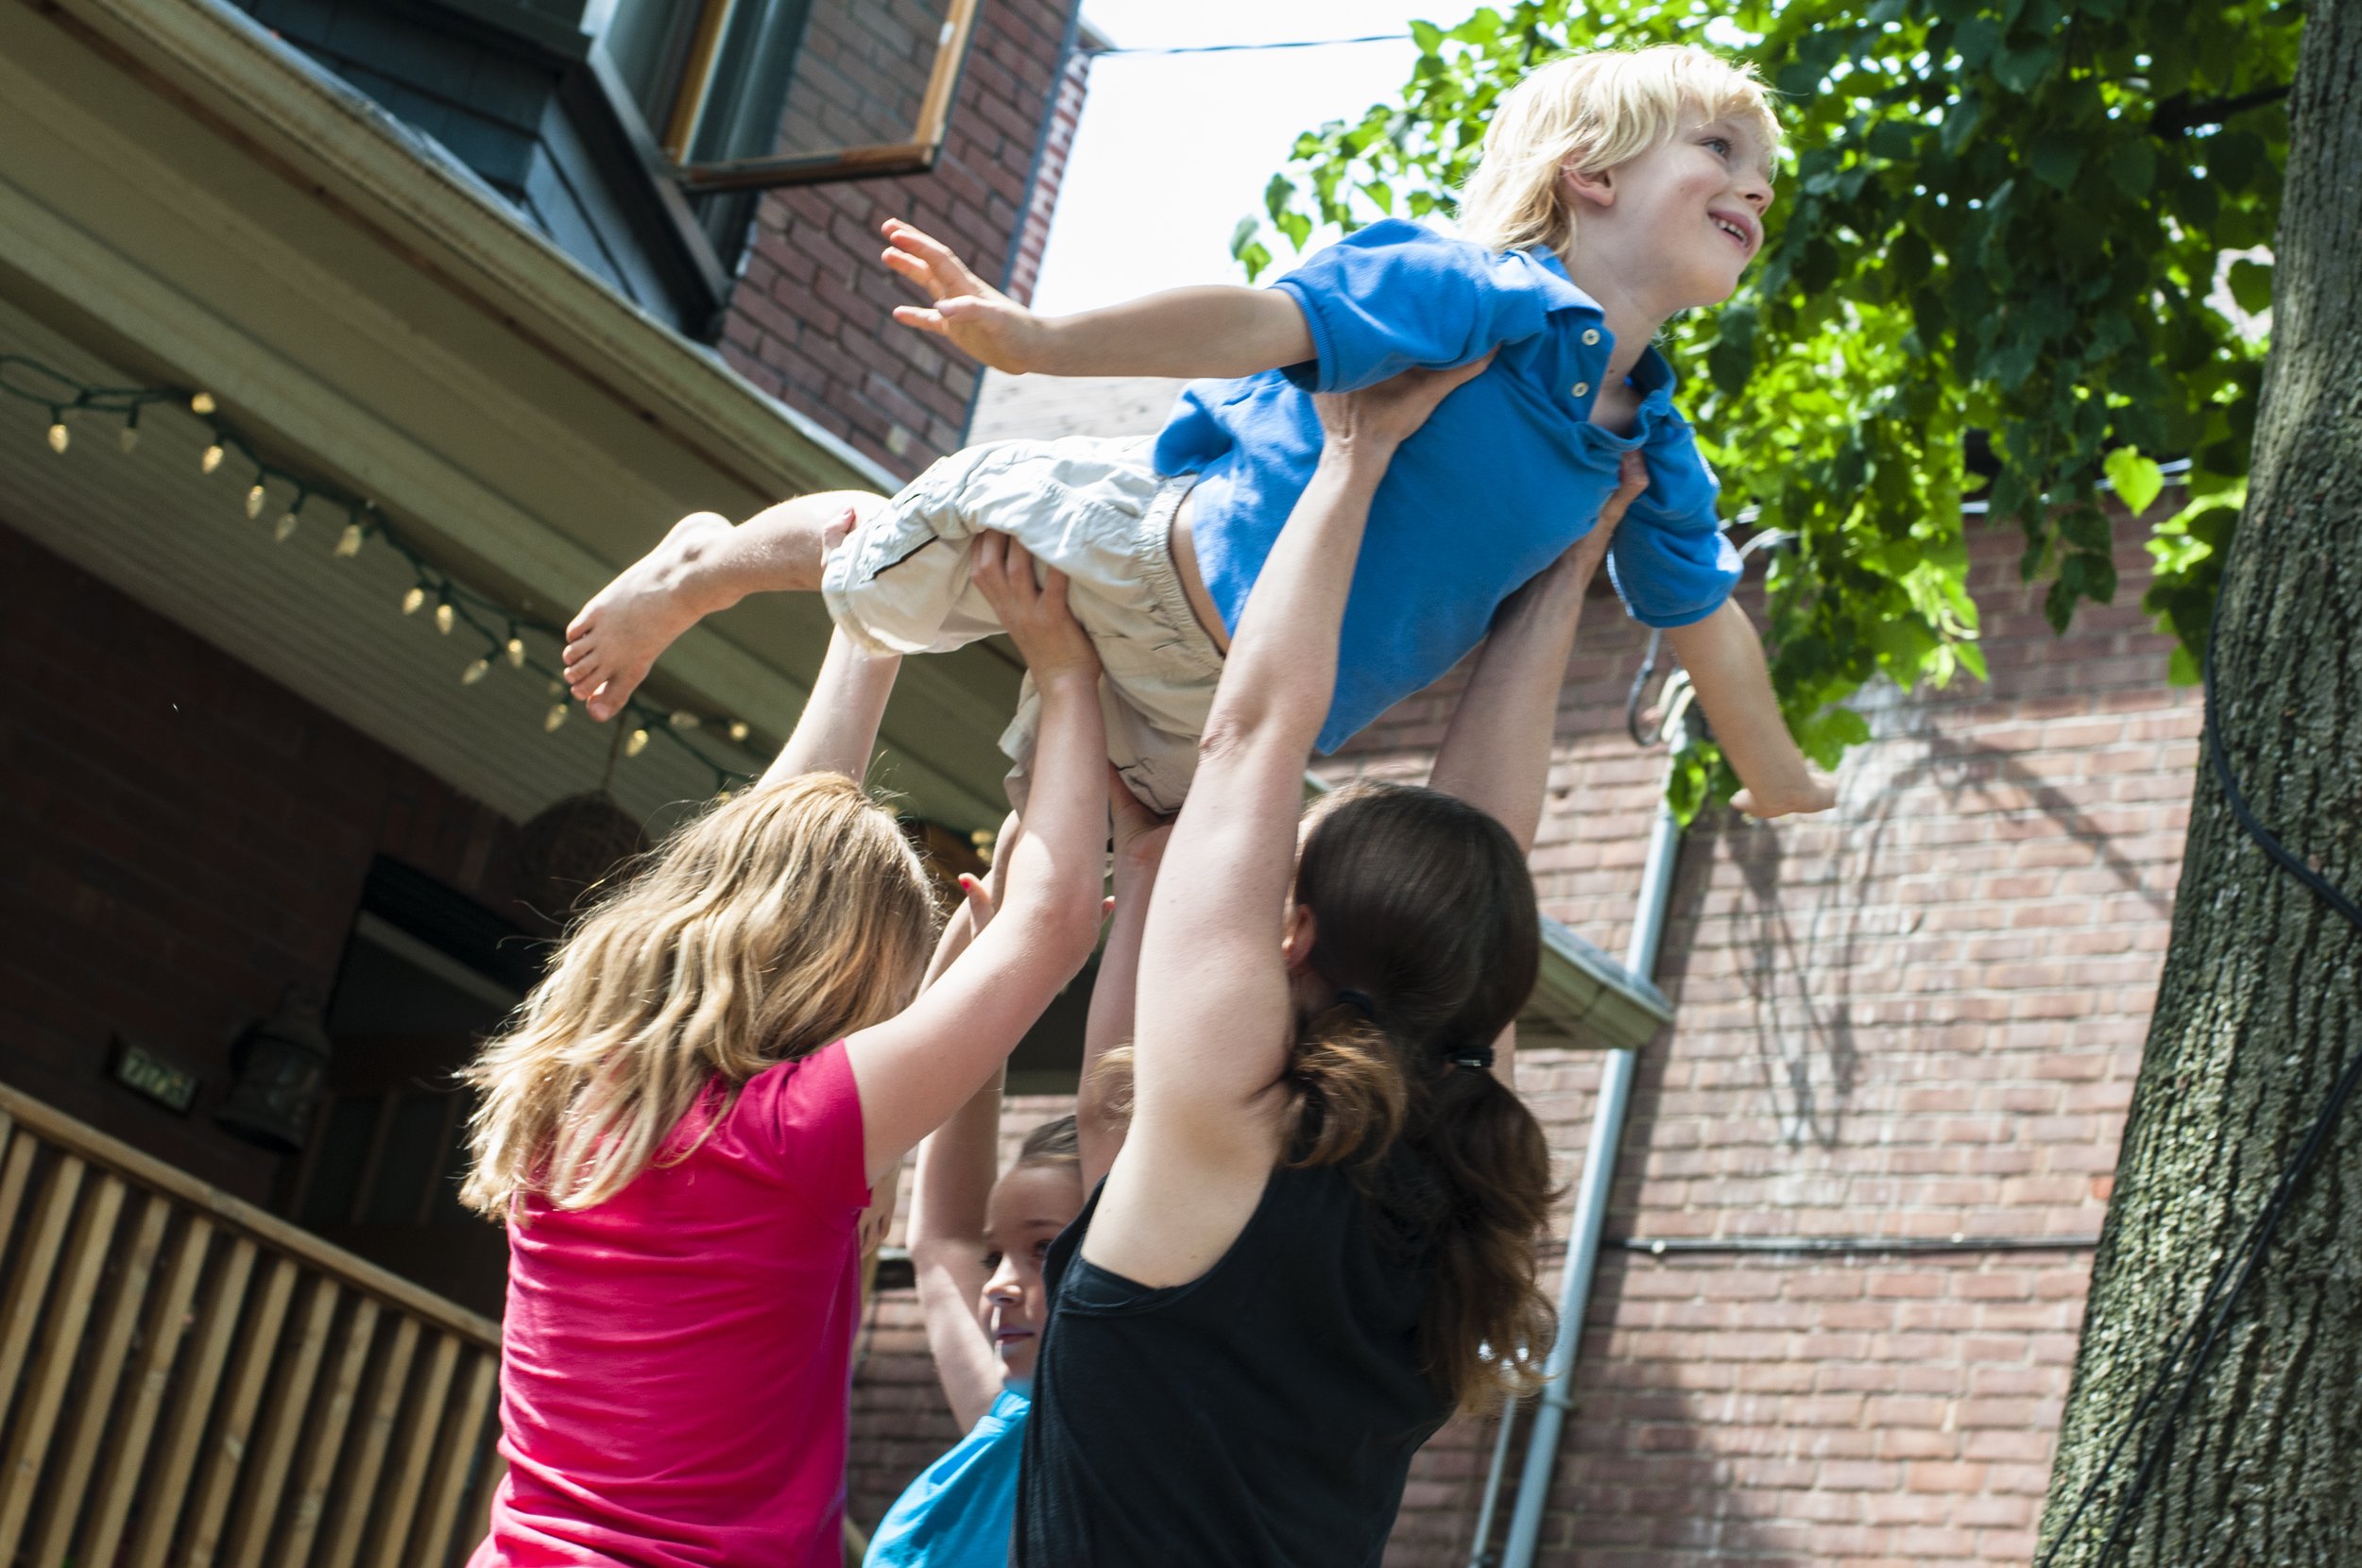 Several community participants lift a young child over their heads; it looks like he's flying.